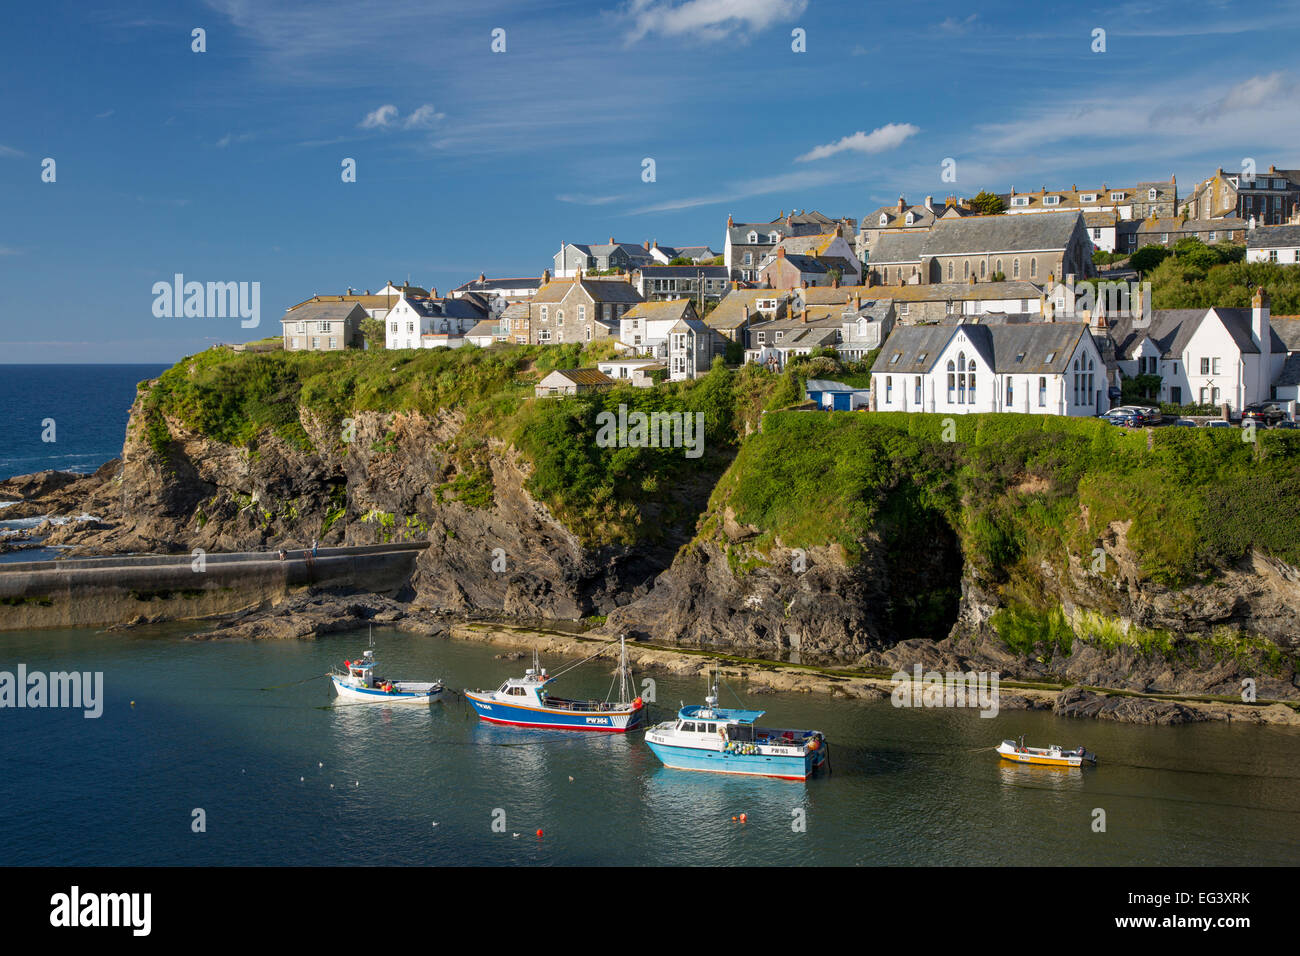 Evening over seaport village of Port Isaac, Cornwall, England Stock Photo